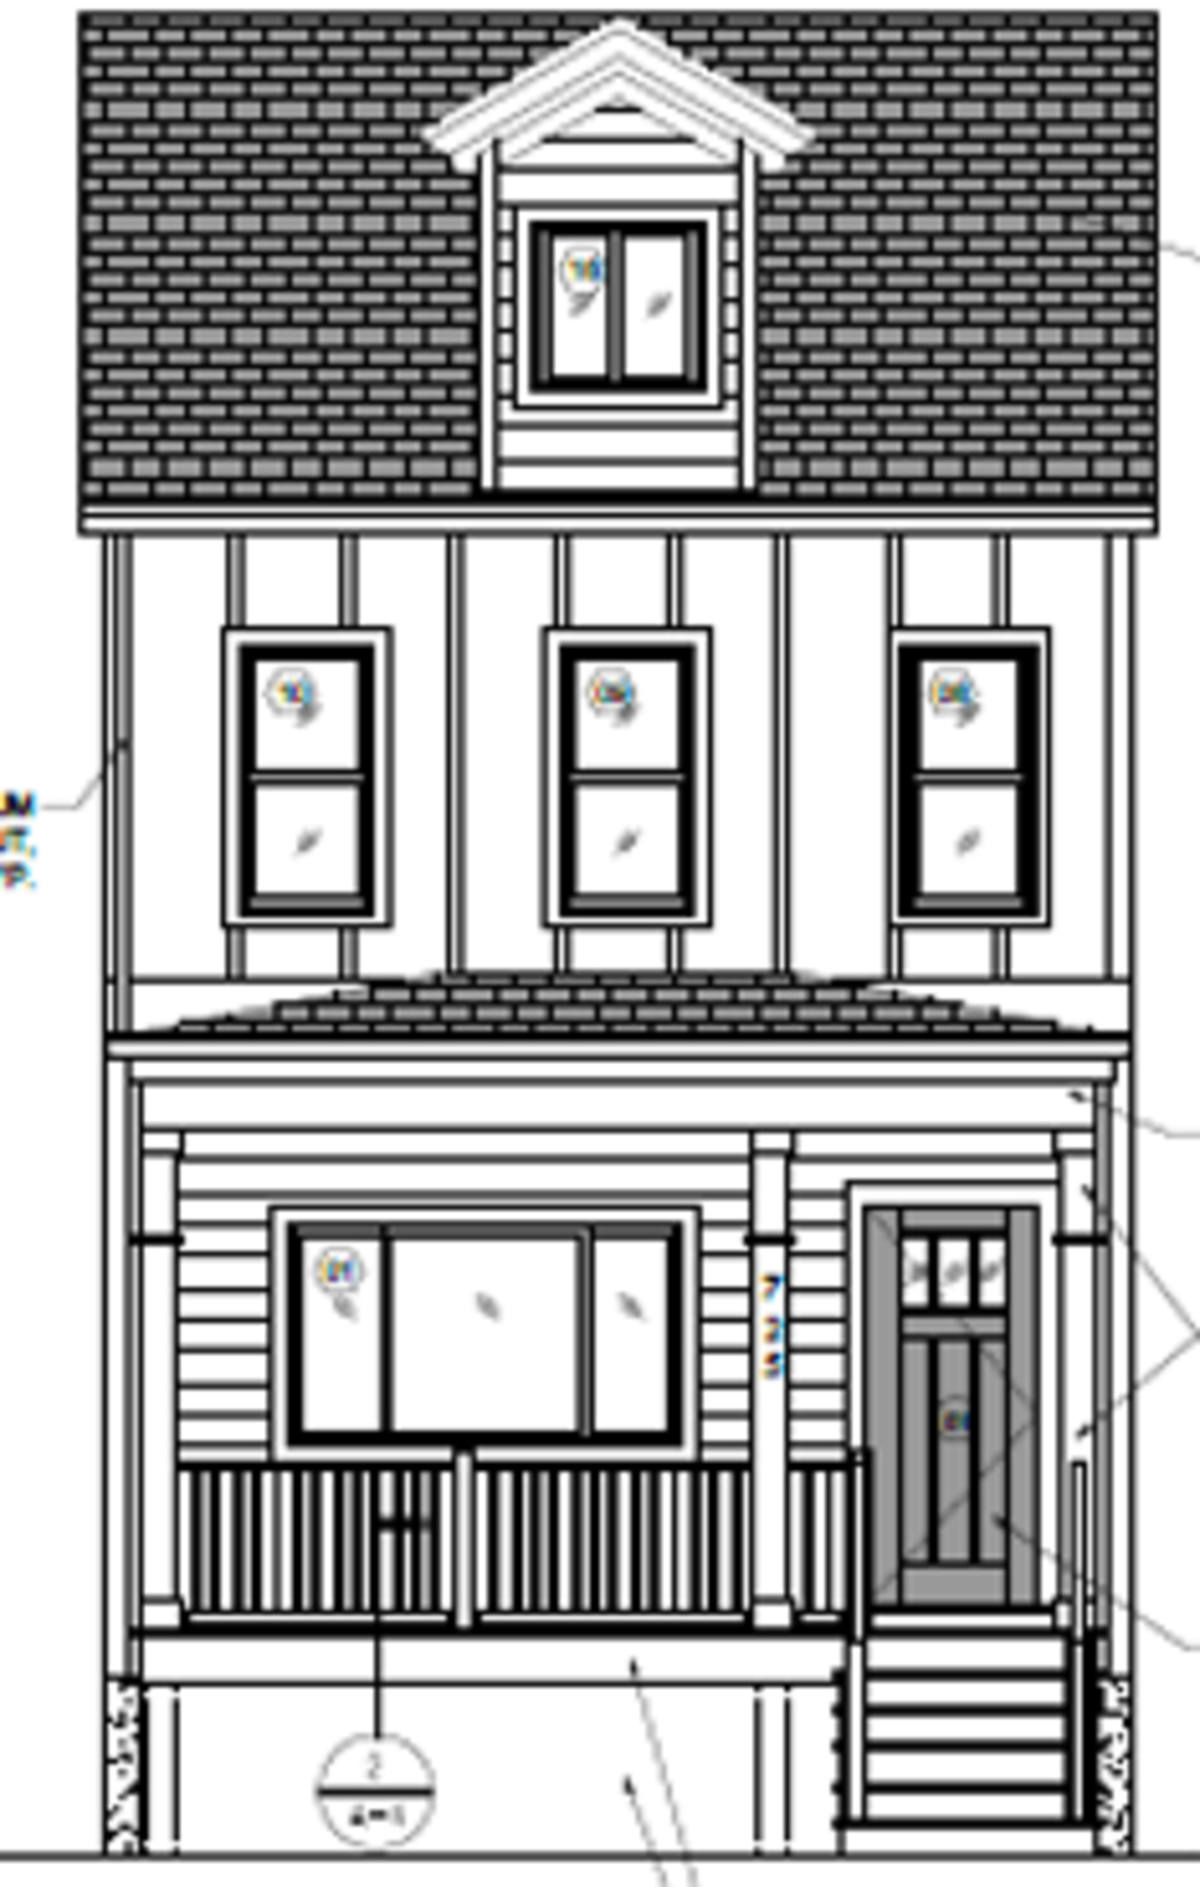 735 Excelsior Street facade drawing- property is coming soon